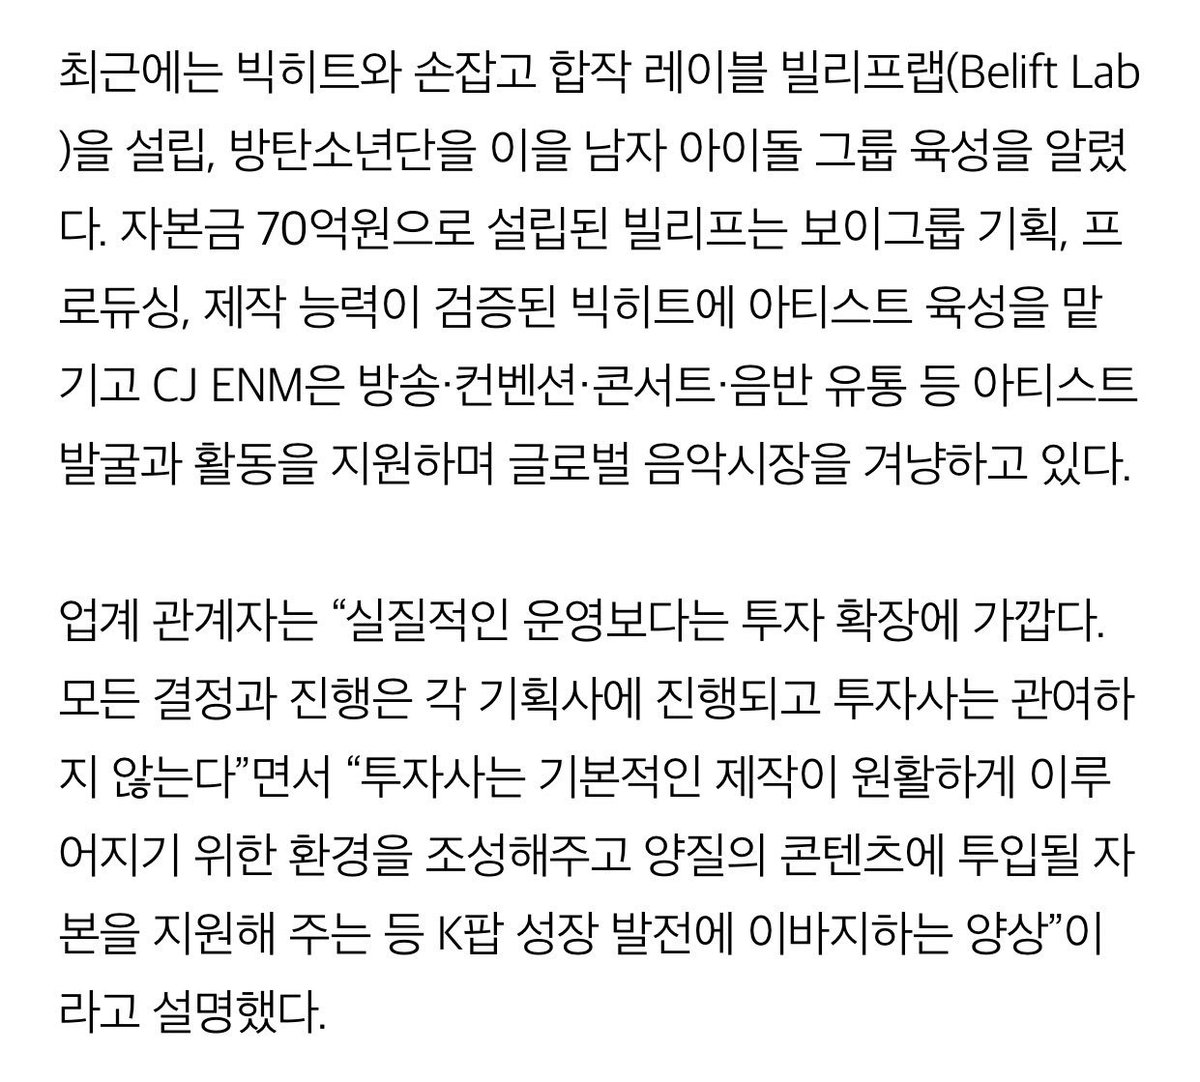 Recently, they’ve partnered w/Big Hit to make male idol group. They invested $6.16m into Belift Lab. BH will take on the artist development/music production while CJENM will be in charge of the global promotion w/ its skills in broadcast, convention/concert, music distribution.